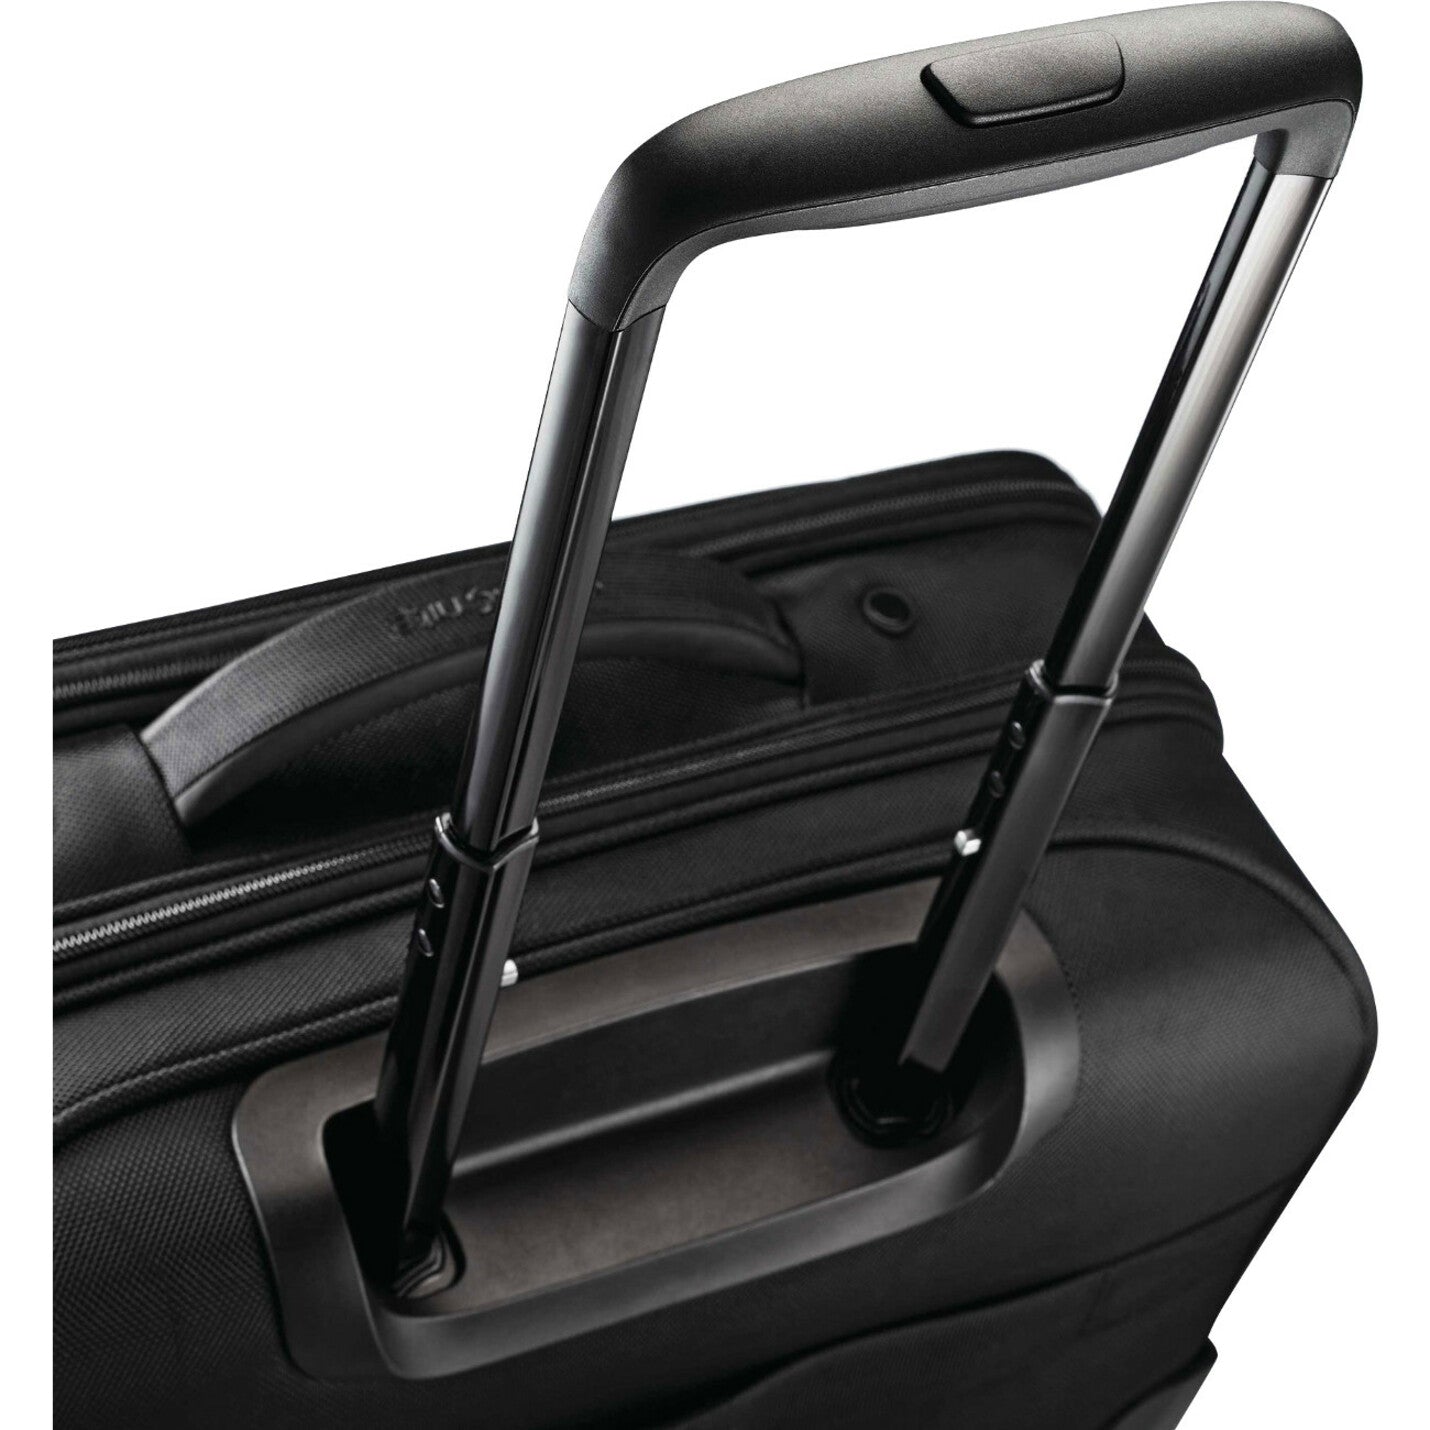 Samsonite Xenon Carrying Case (Suitcase) for 15.6" Notebook - Black